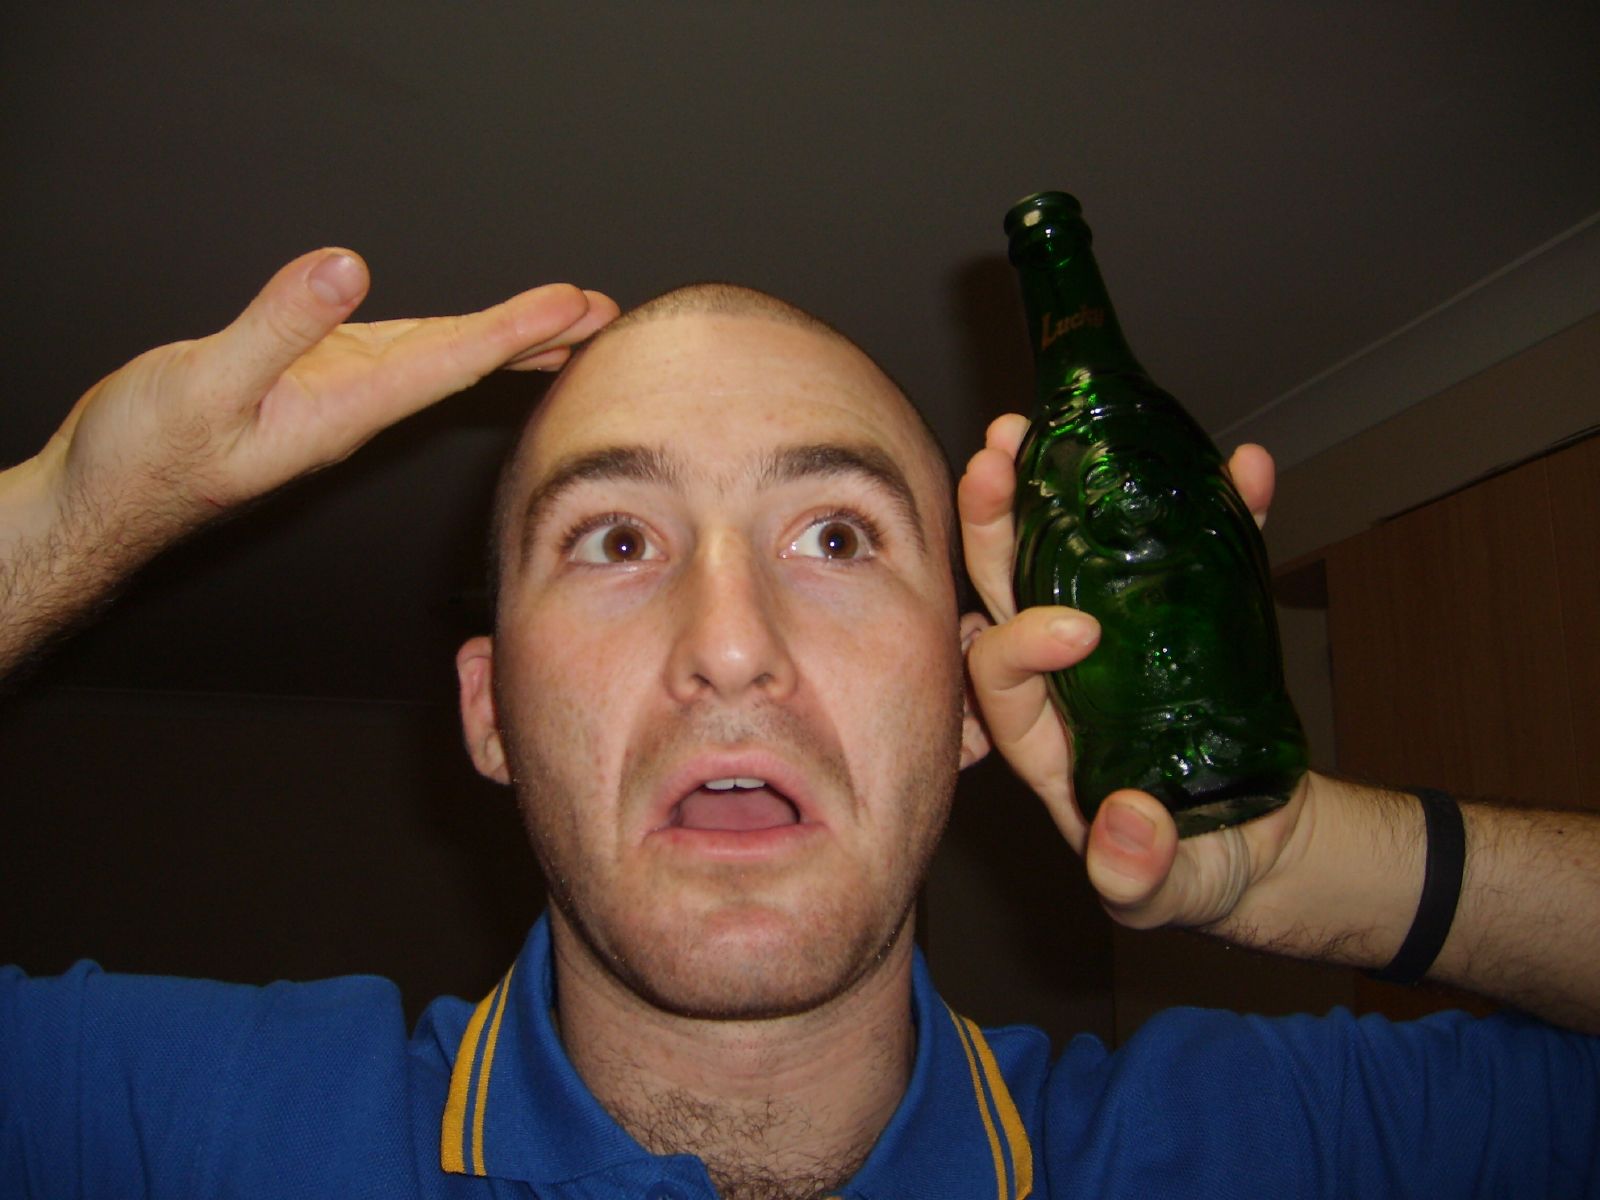 a man is looking at the camera holding a green bottle